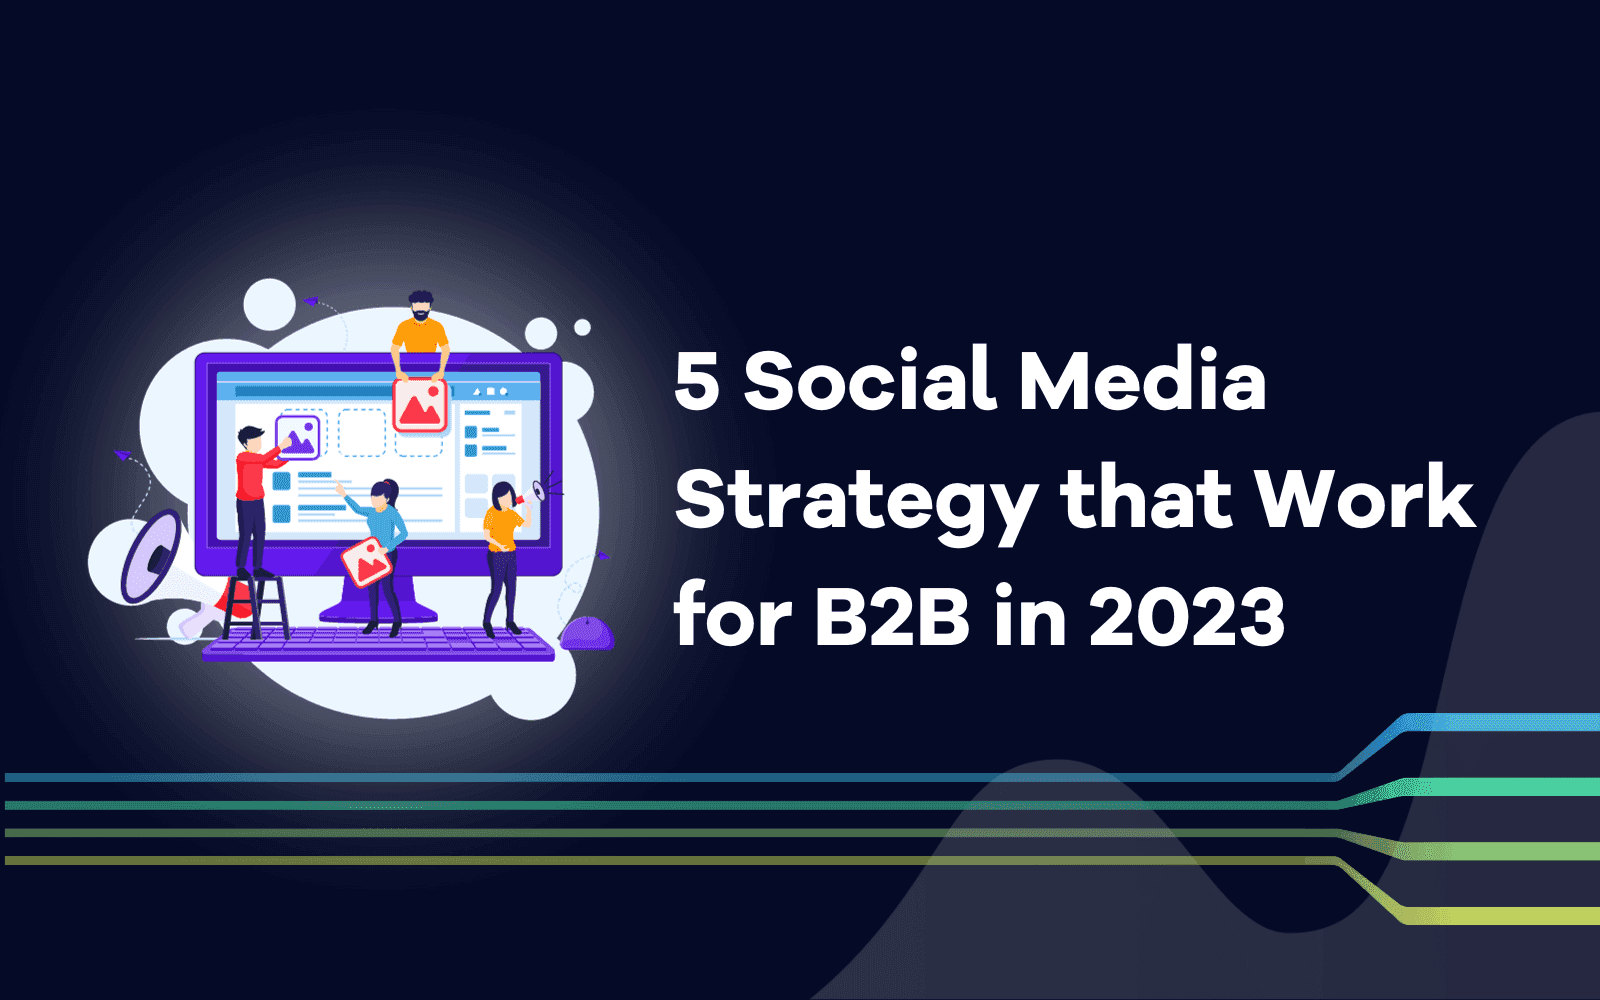 Social Media Strategy that Work for B2B in 2023